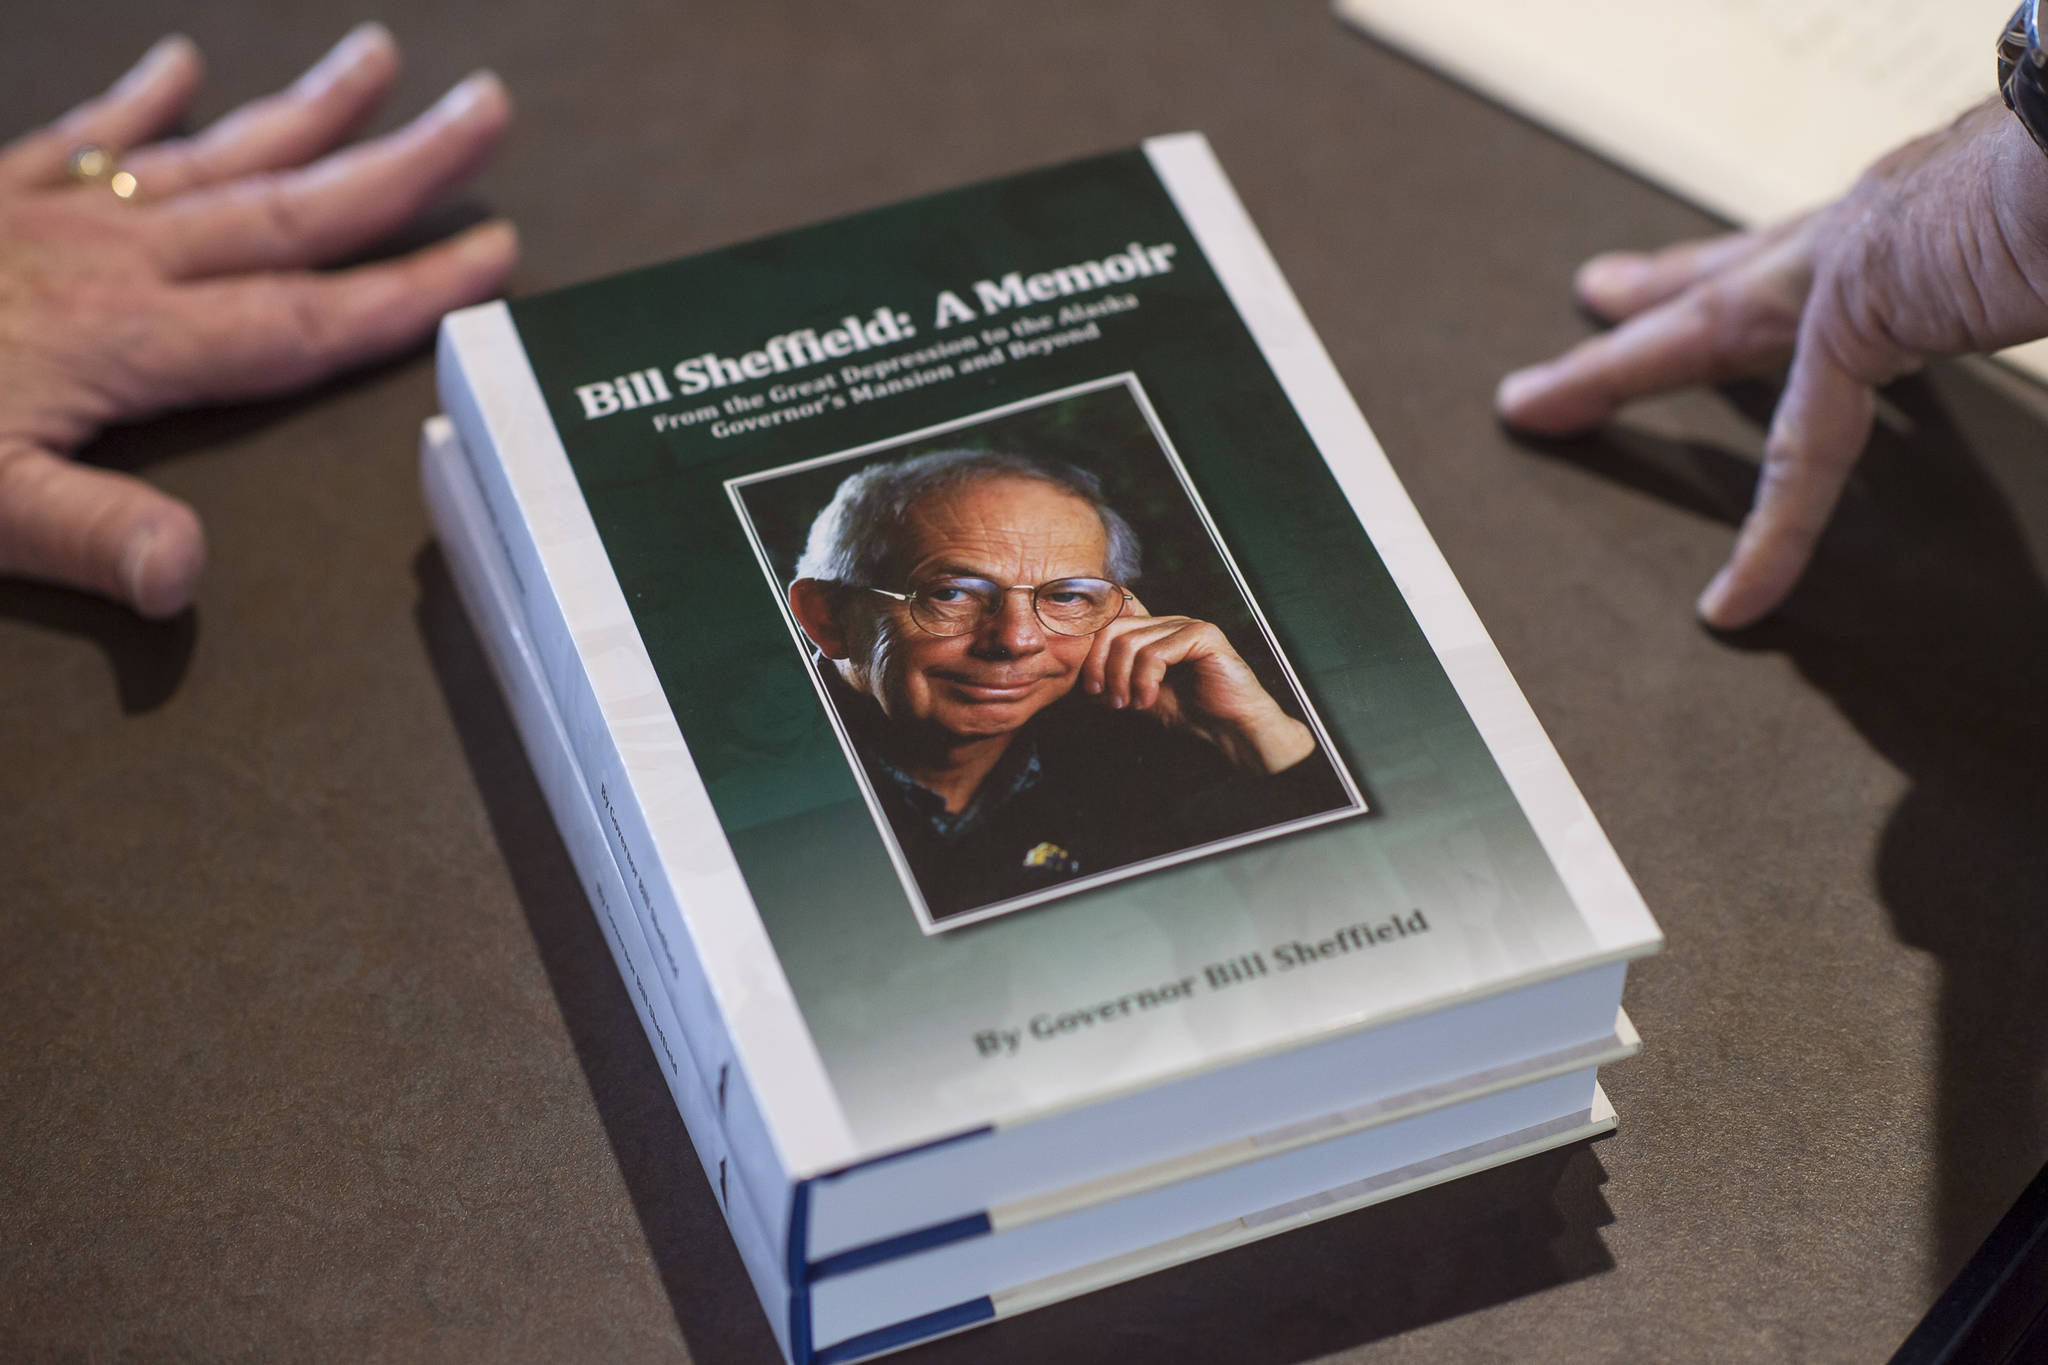 Former Alaska governor Bill Sheffield talks life, time in office and new book